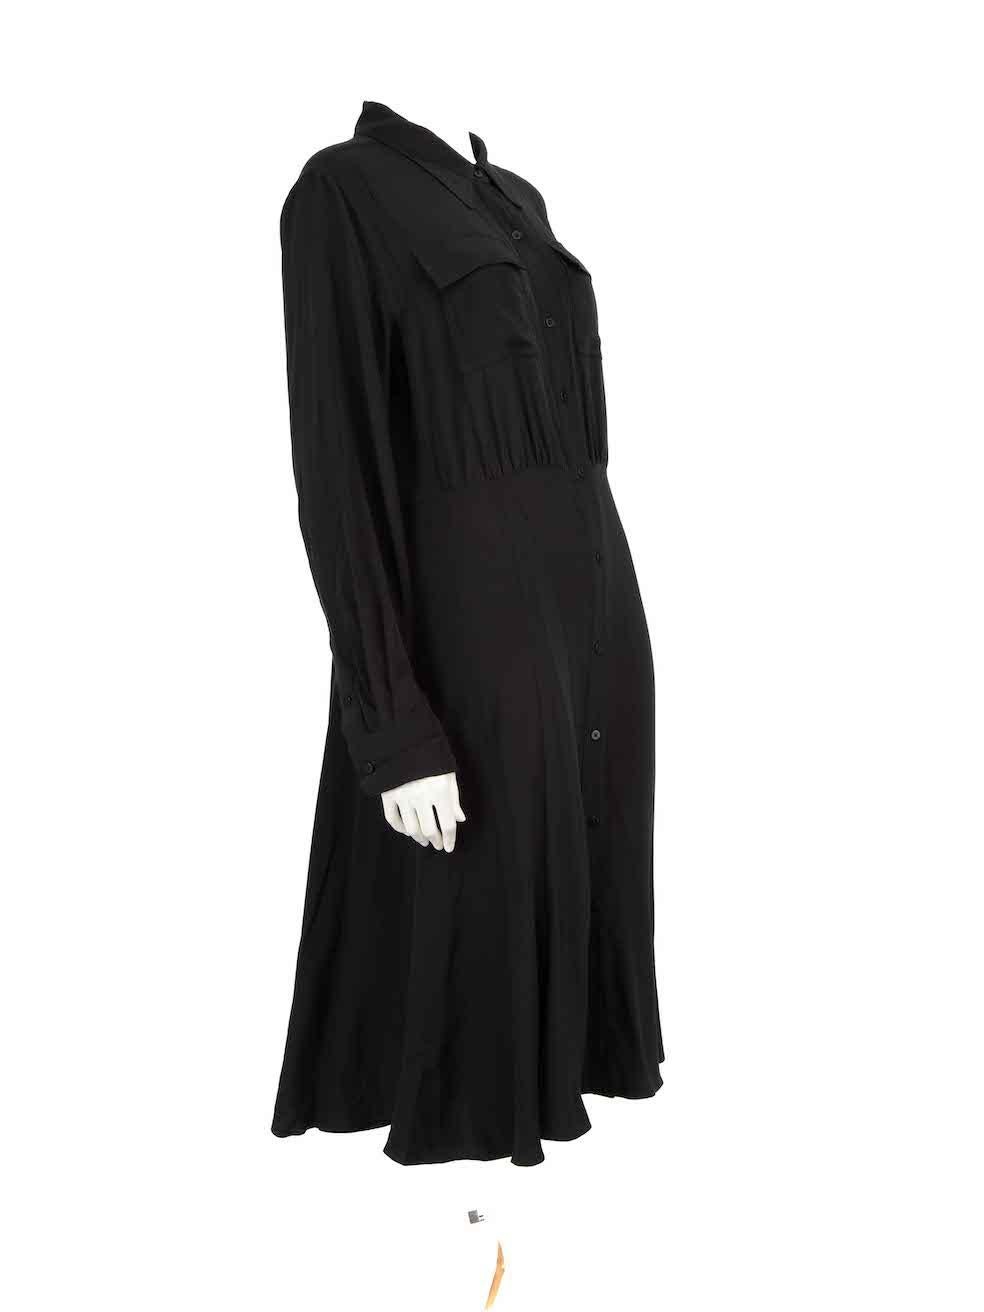 CONDITION is Very good. Minimal wear to dress is evident. Minimal wear with the size label having been removed and the belt is missing on this used Diane Von Furstenberg designer resale item.
 
 
 
 Details
 
 
 Black
 
 Silk
 
 Shirt dress
 
 Long